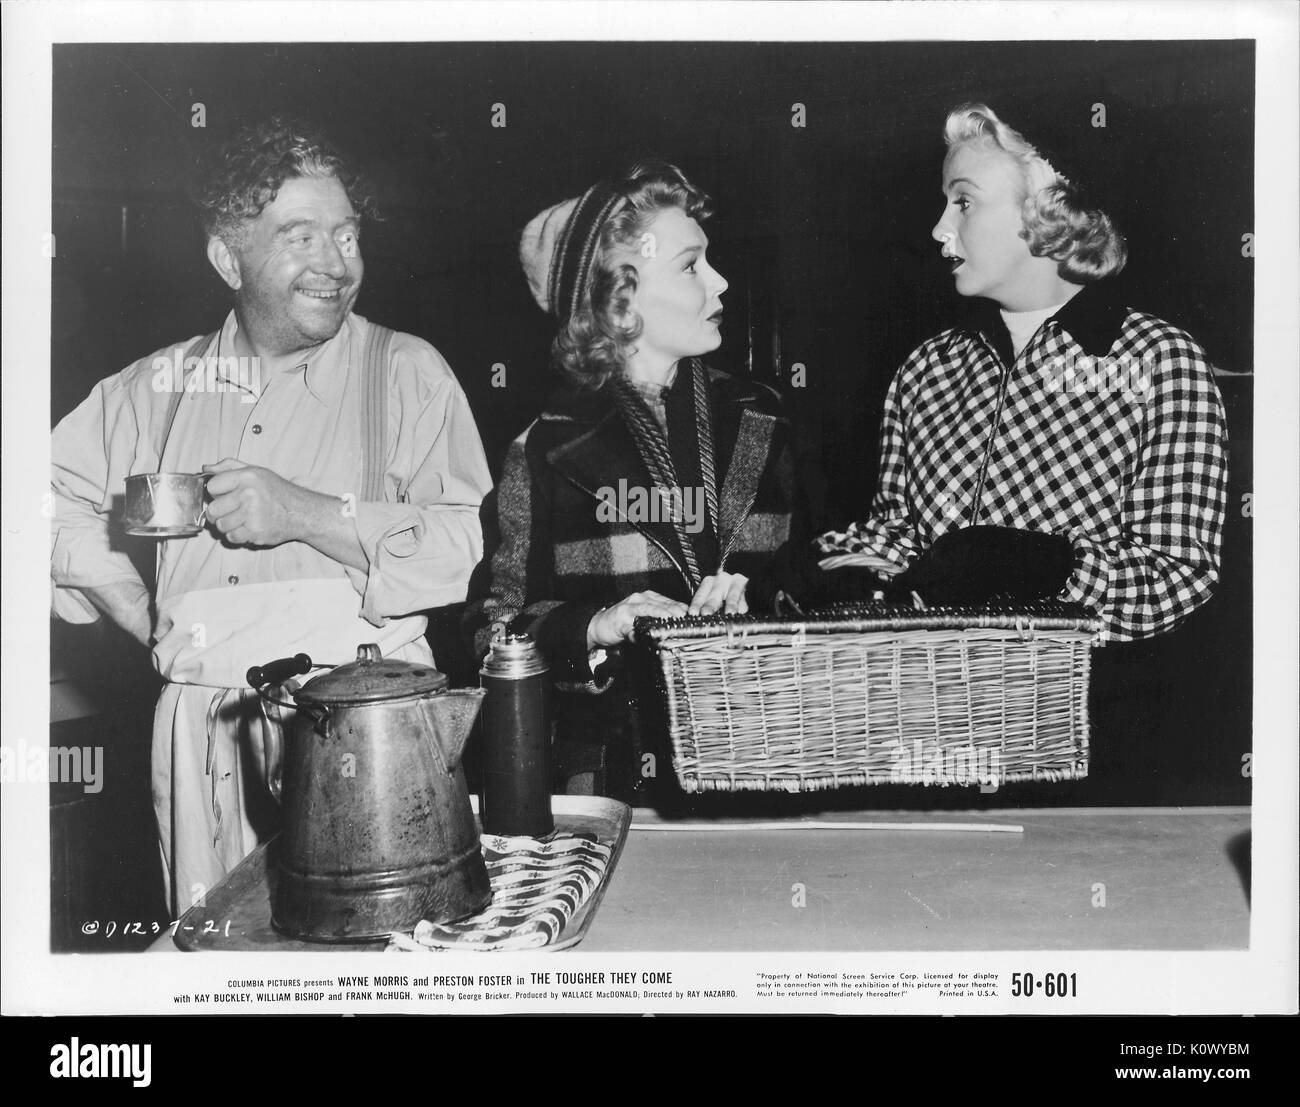 A movie still scene from 'The Tougher They Come' (1950 Columbia Pictures film), showing three adults, two women and a man, with the two ladies calmly arguing on something while holding on to a picnic basket, and the man beside the lady in the middle laughingly listening to them, 1950. Stock Photo